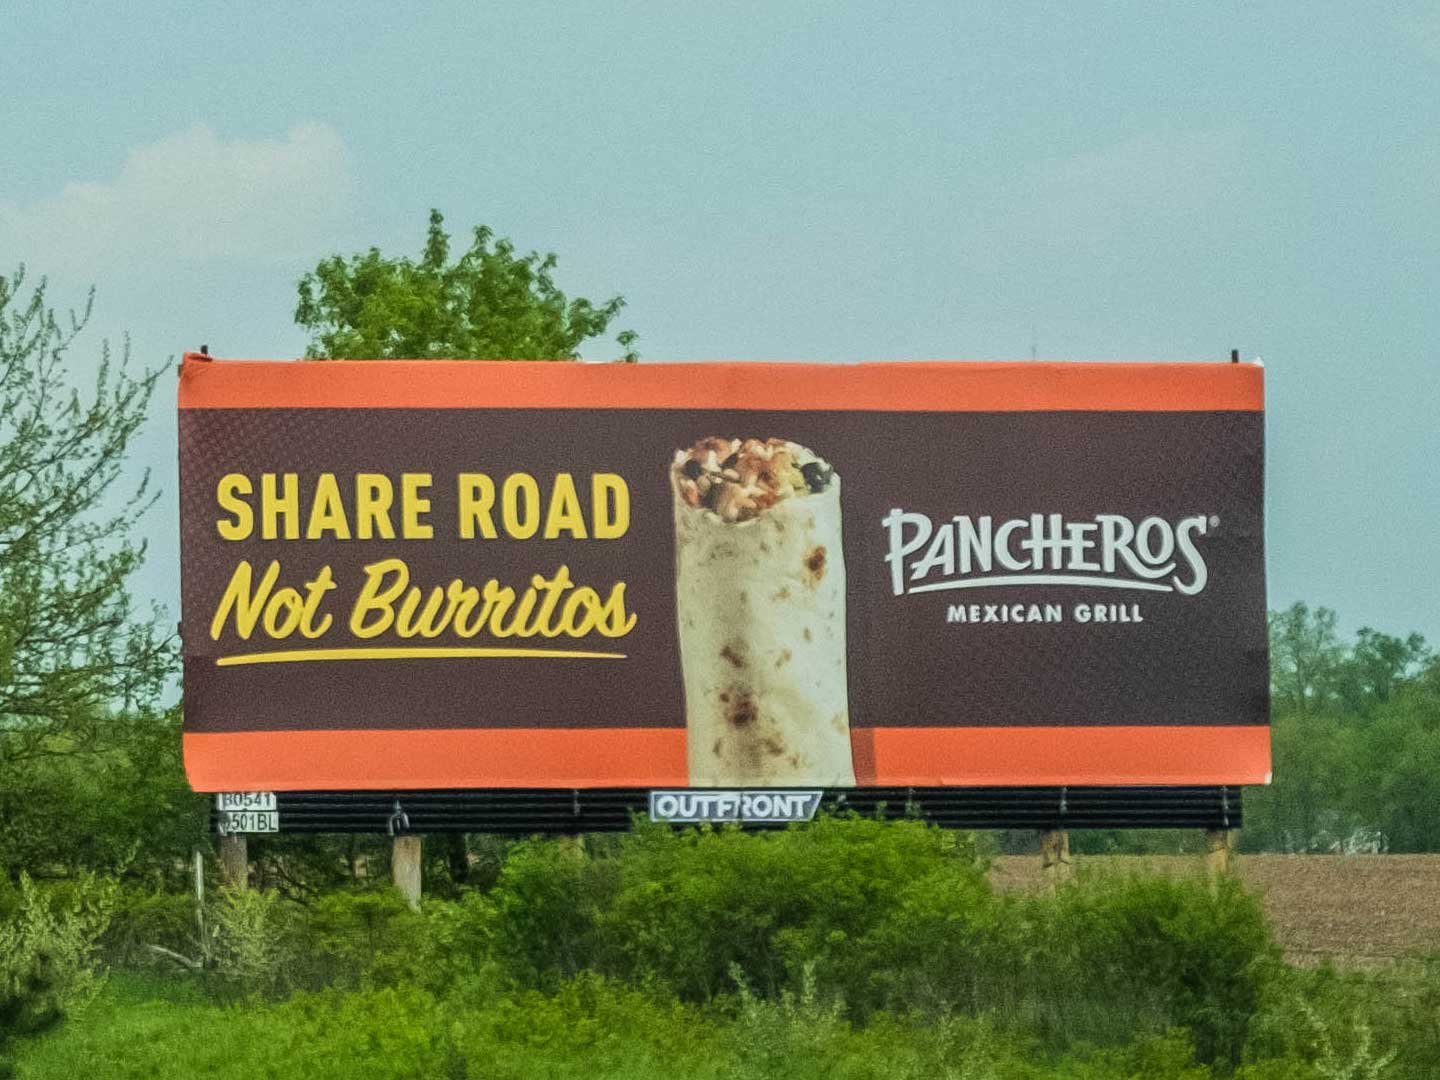 out of home billboard advertising lansing pancheros mexican grill